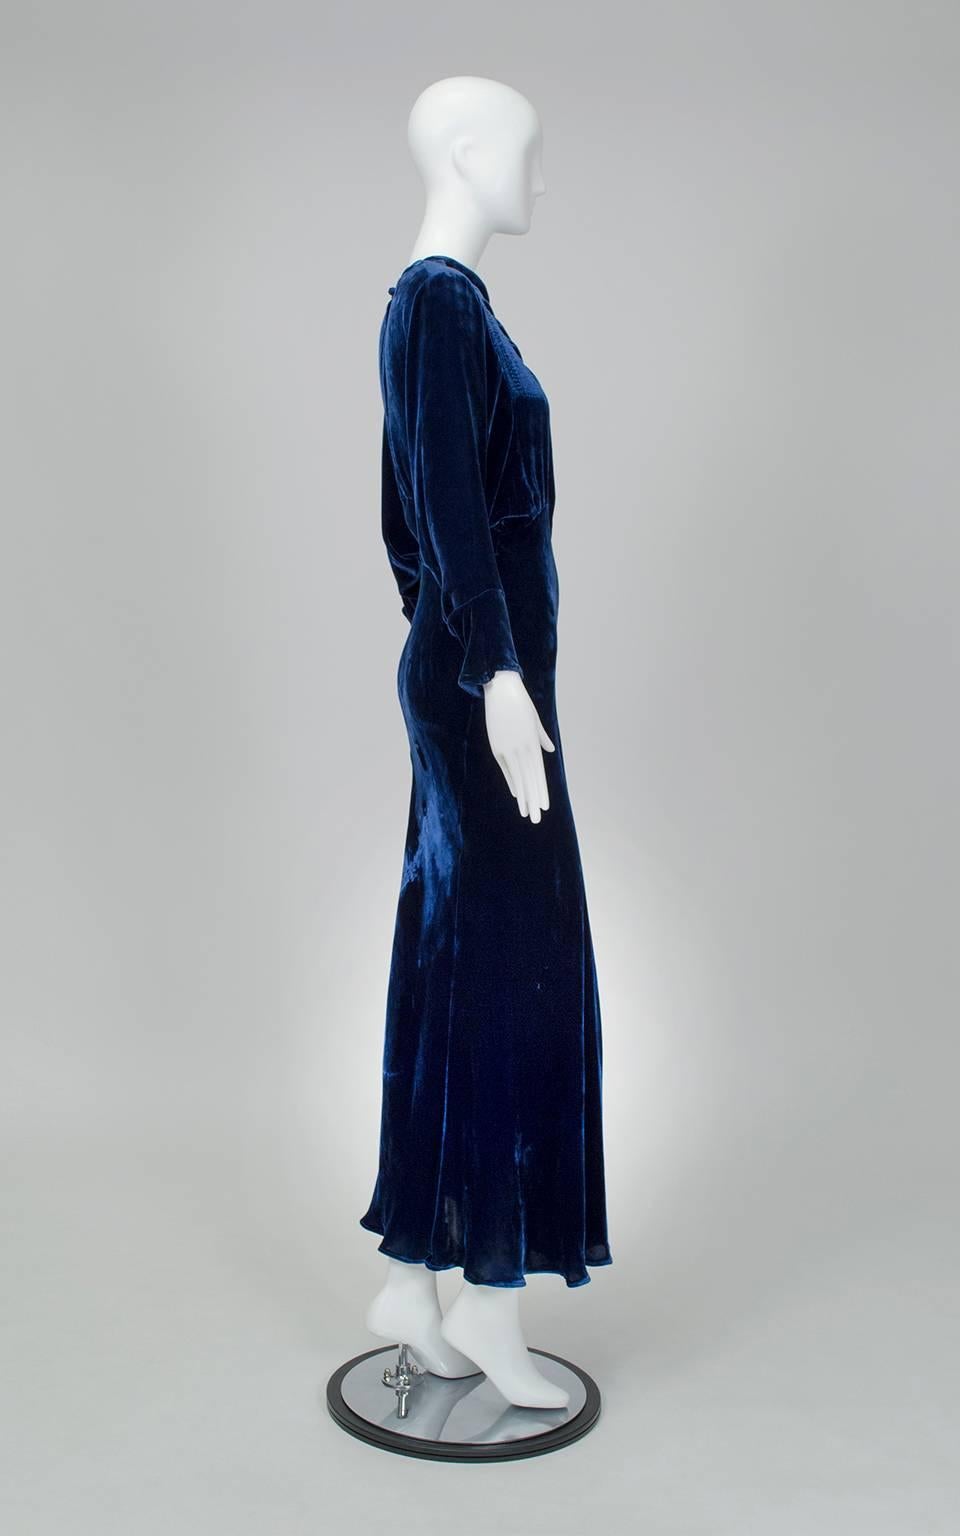 With its liquid draping and dramatic batwing sleeves, this gown would be right at home on the Columbia Pictures logo. Unapologetically Art Deco, it fully covers the body but reveals every curve thanks to a sinewy bias cut and luxuriously-clingy silk